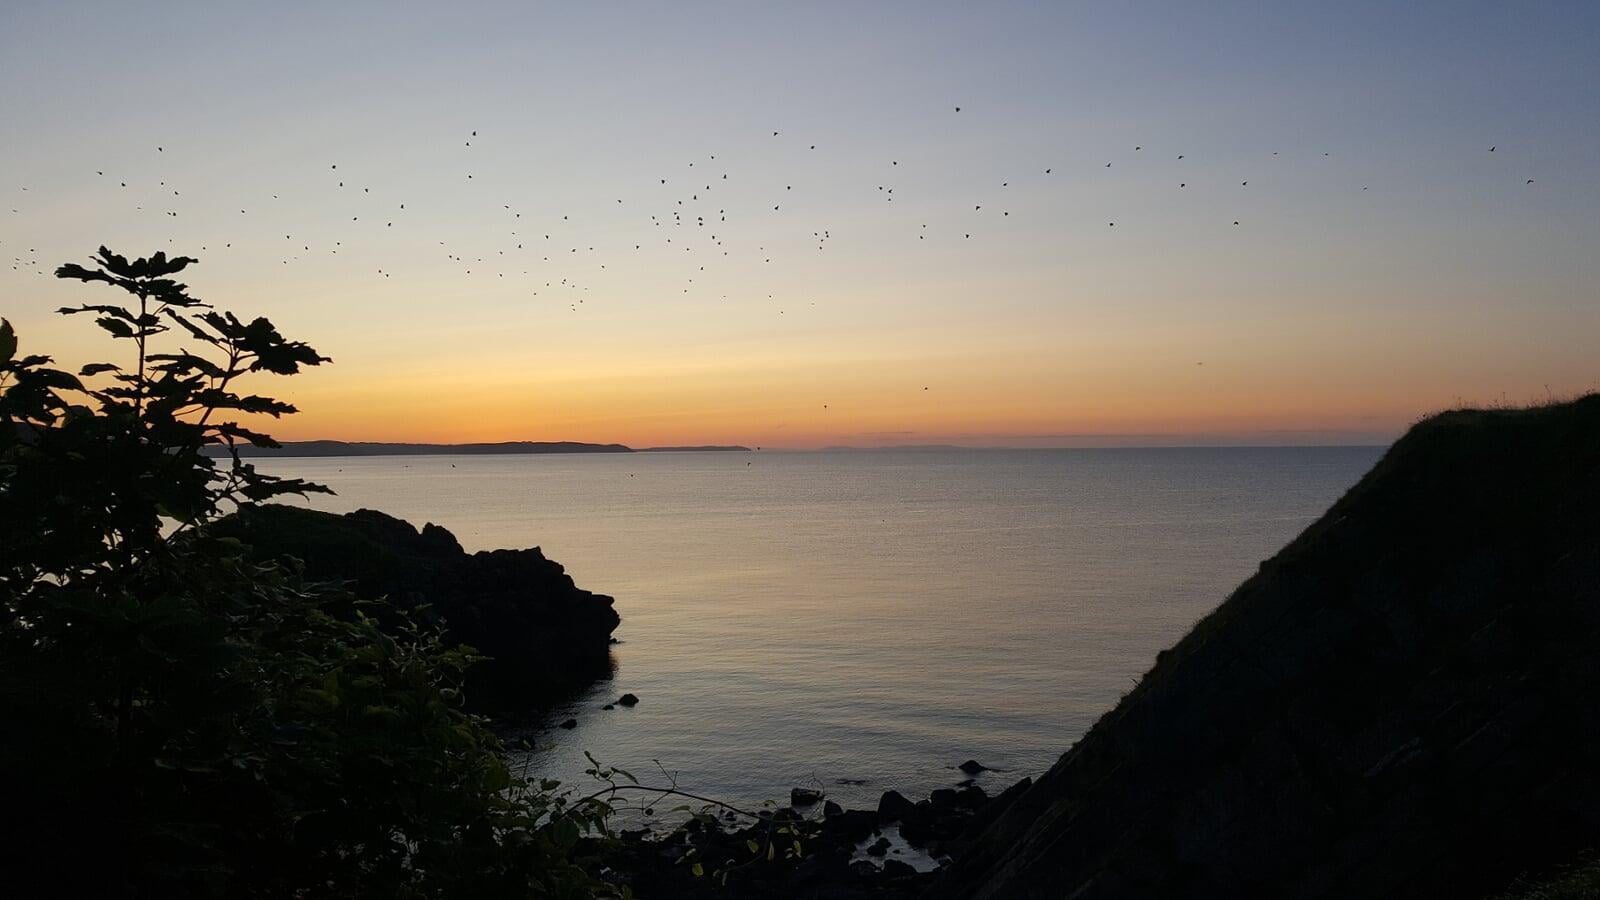 Stunning sunrise over Stackpole Quay near Barafundle Bay, just the spot for an early morning sea swim